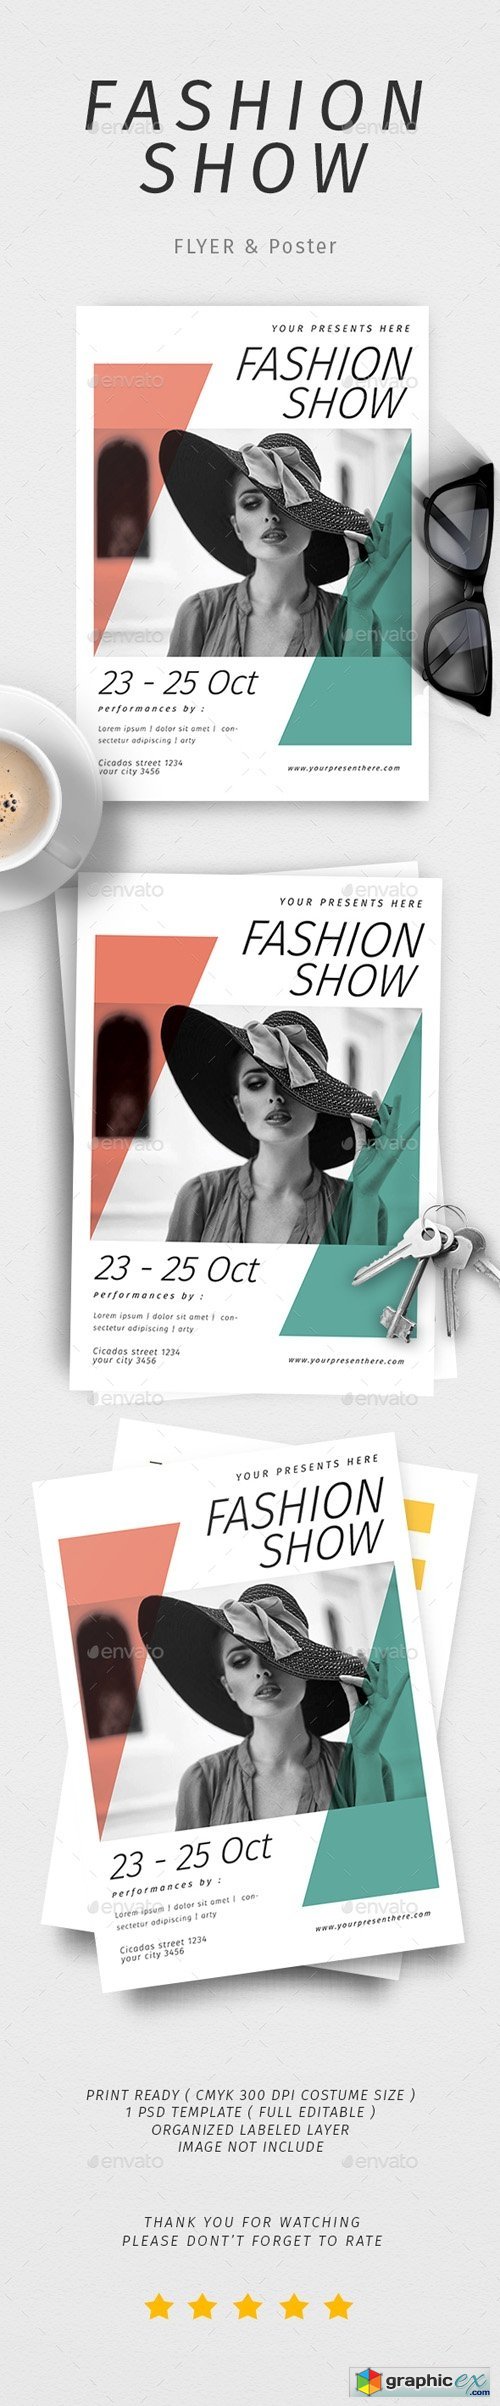 Fashion Show Poster & Flyer